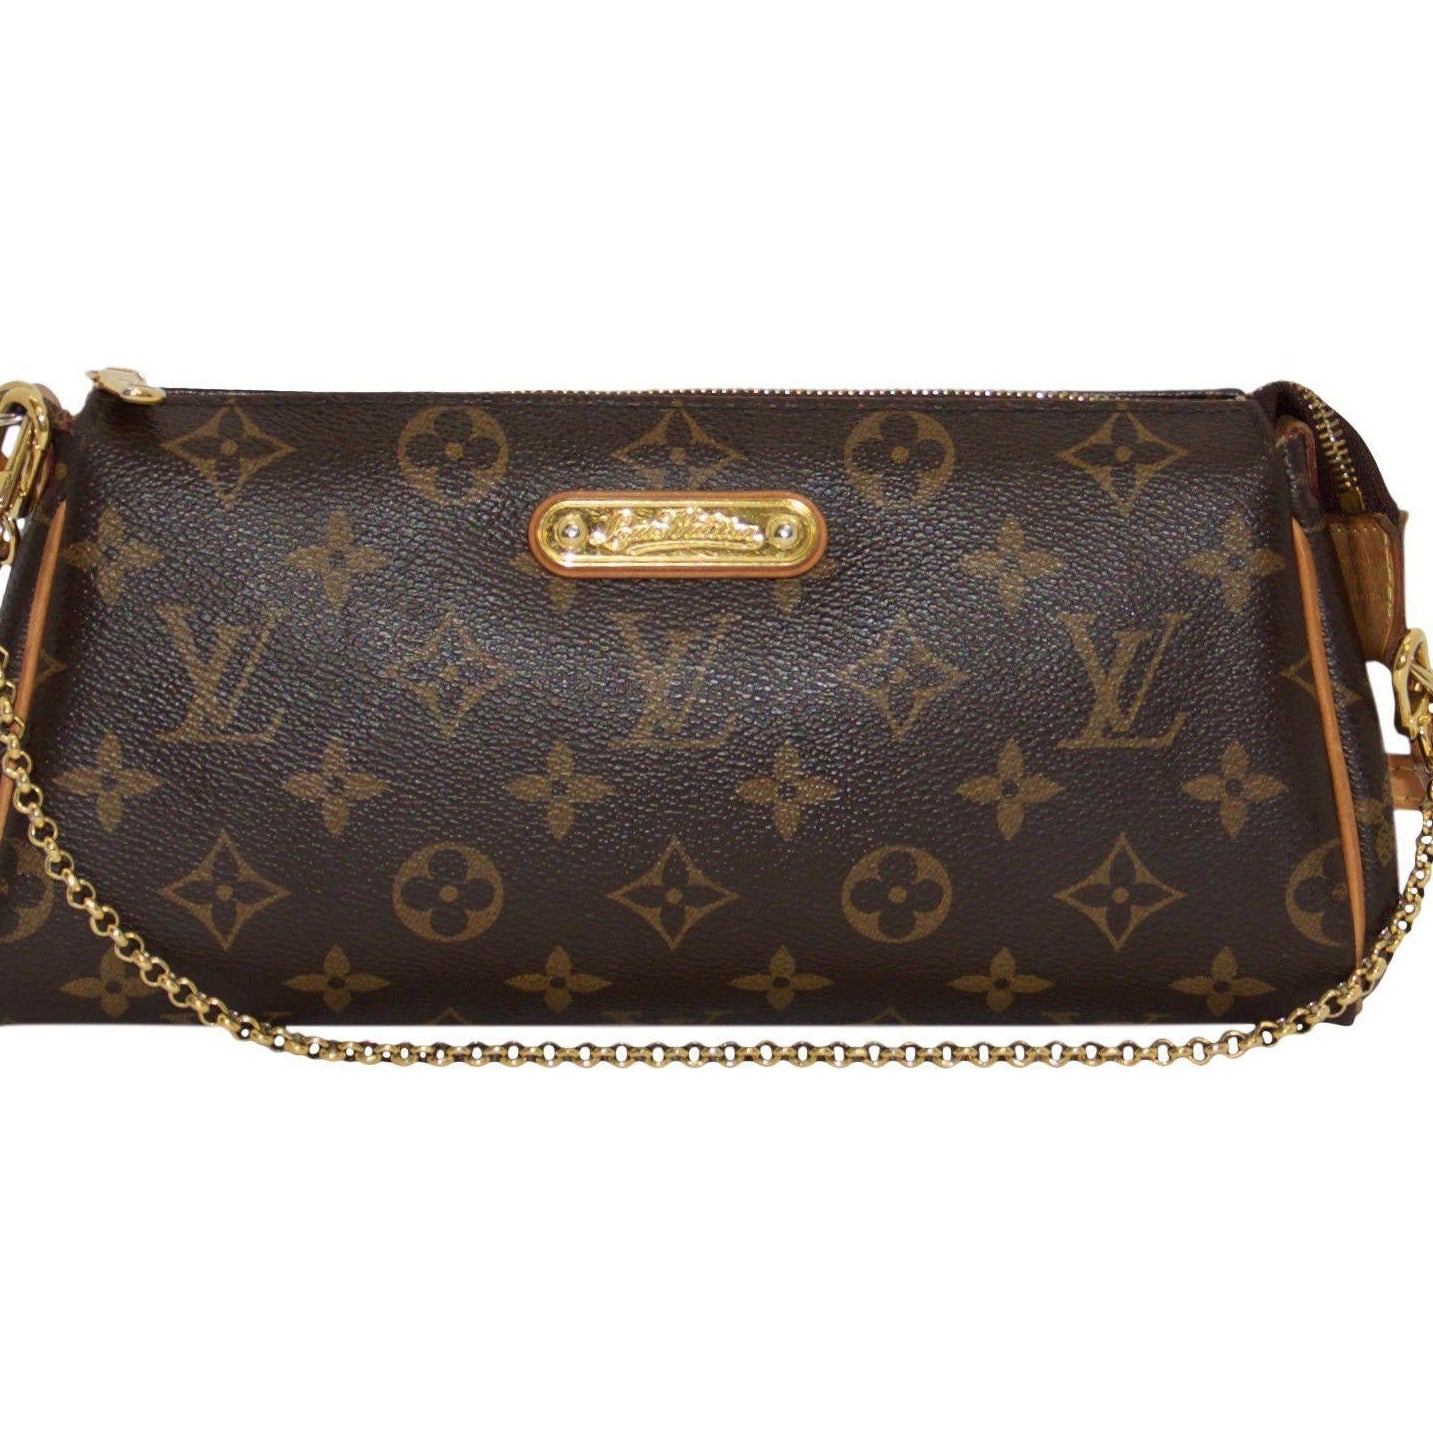  Authentic LV Eva Clutch Ready Stock Luxury Bags  Wallets on Carousell